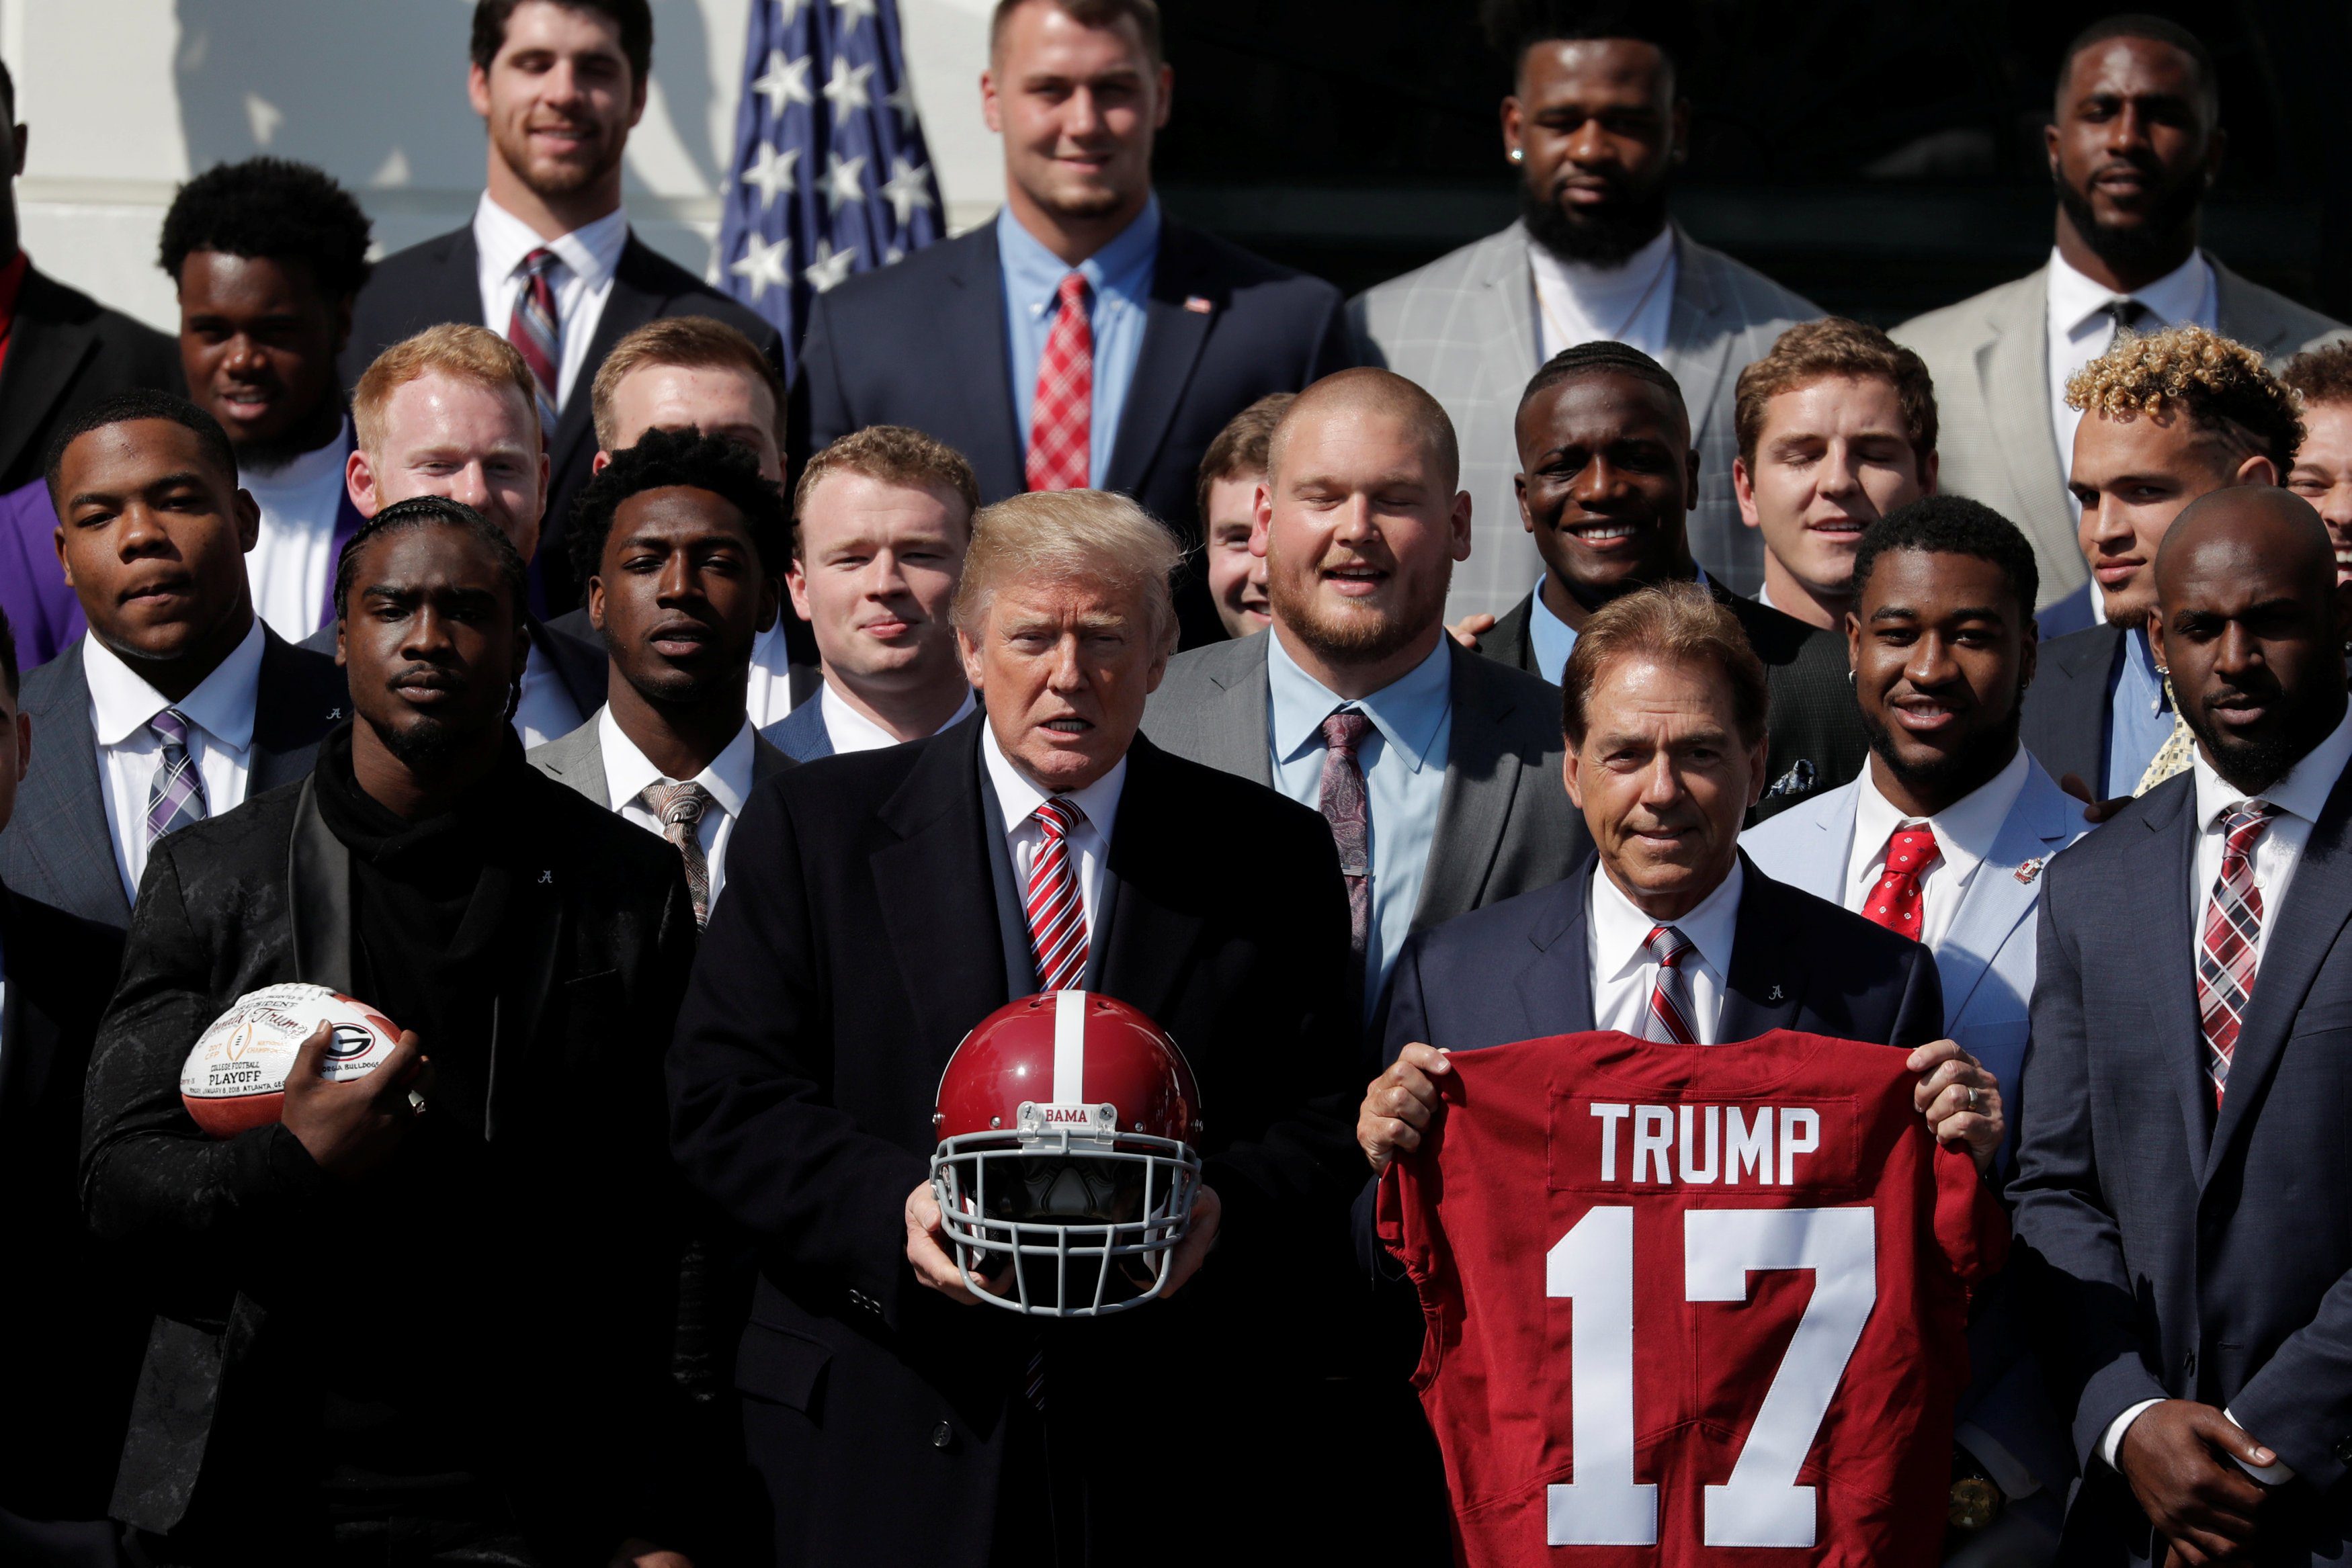 U.S. President Donald Trump welcomes the 2017 NCAA Football National Champions, The Alabama Crimson Tide during an event at the South Lawn of the White House in Washington